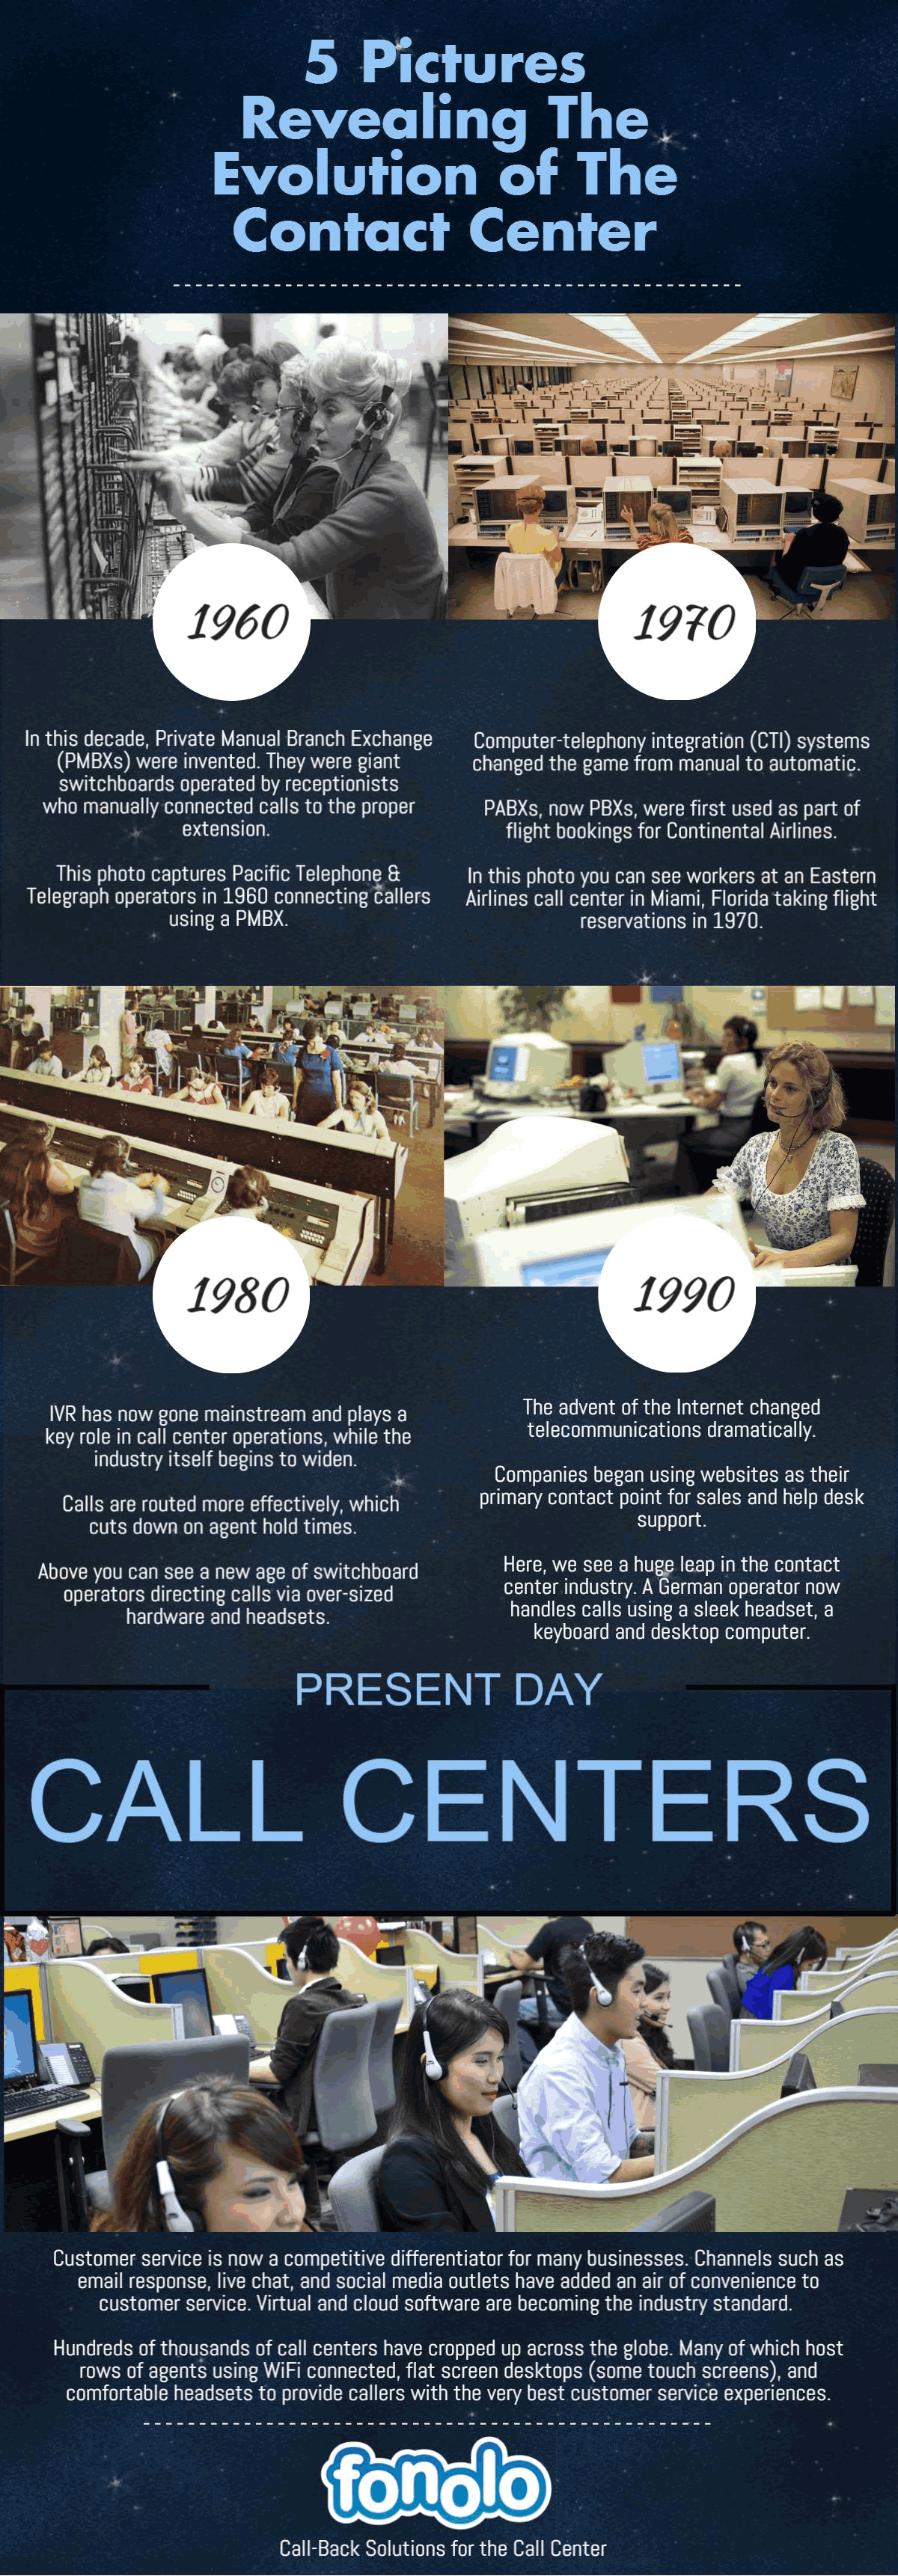 5 Pictures Revealing the Evolution of the Contact Center